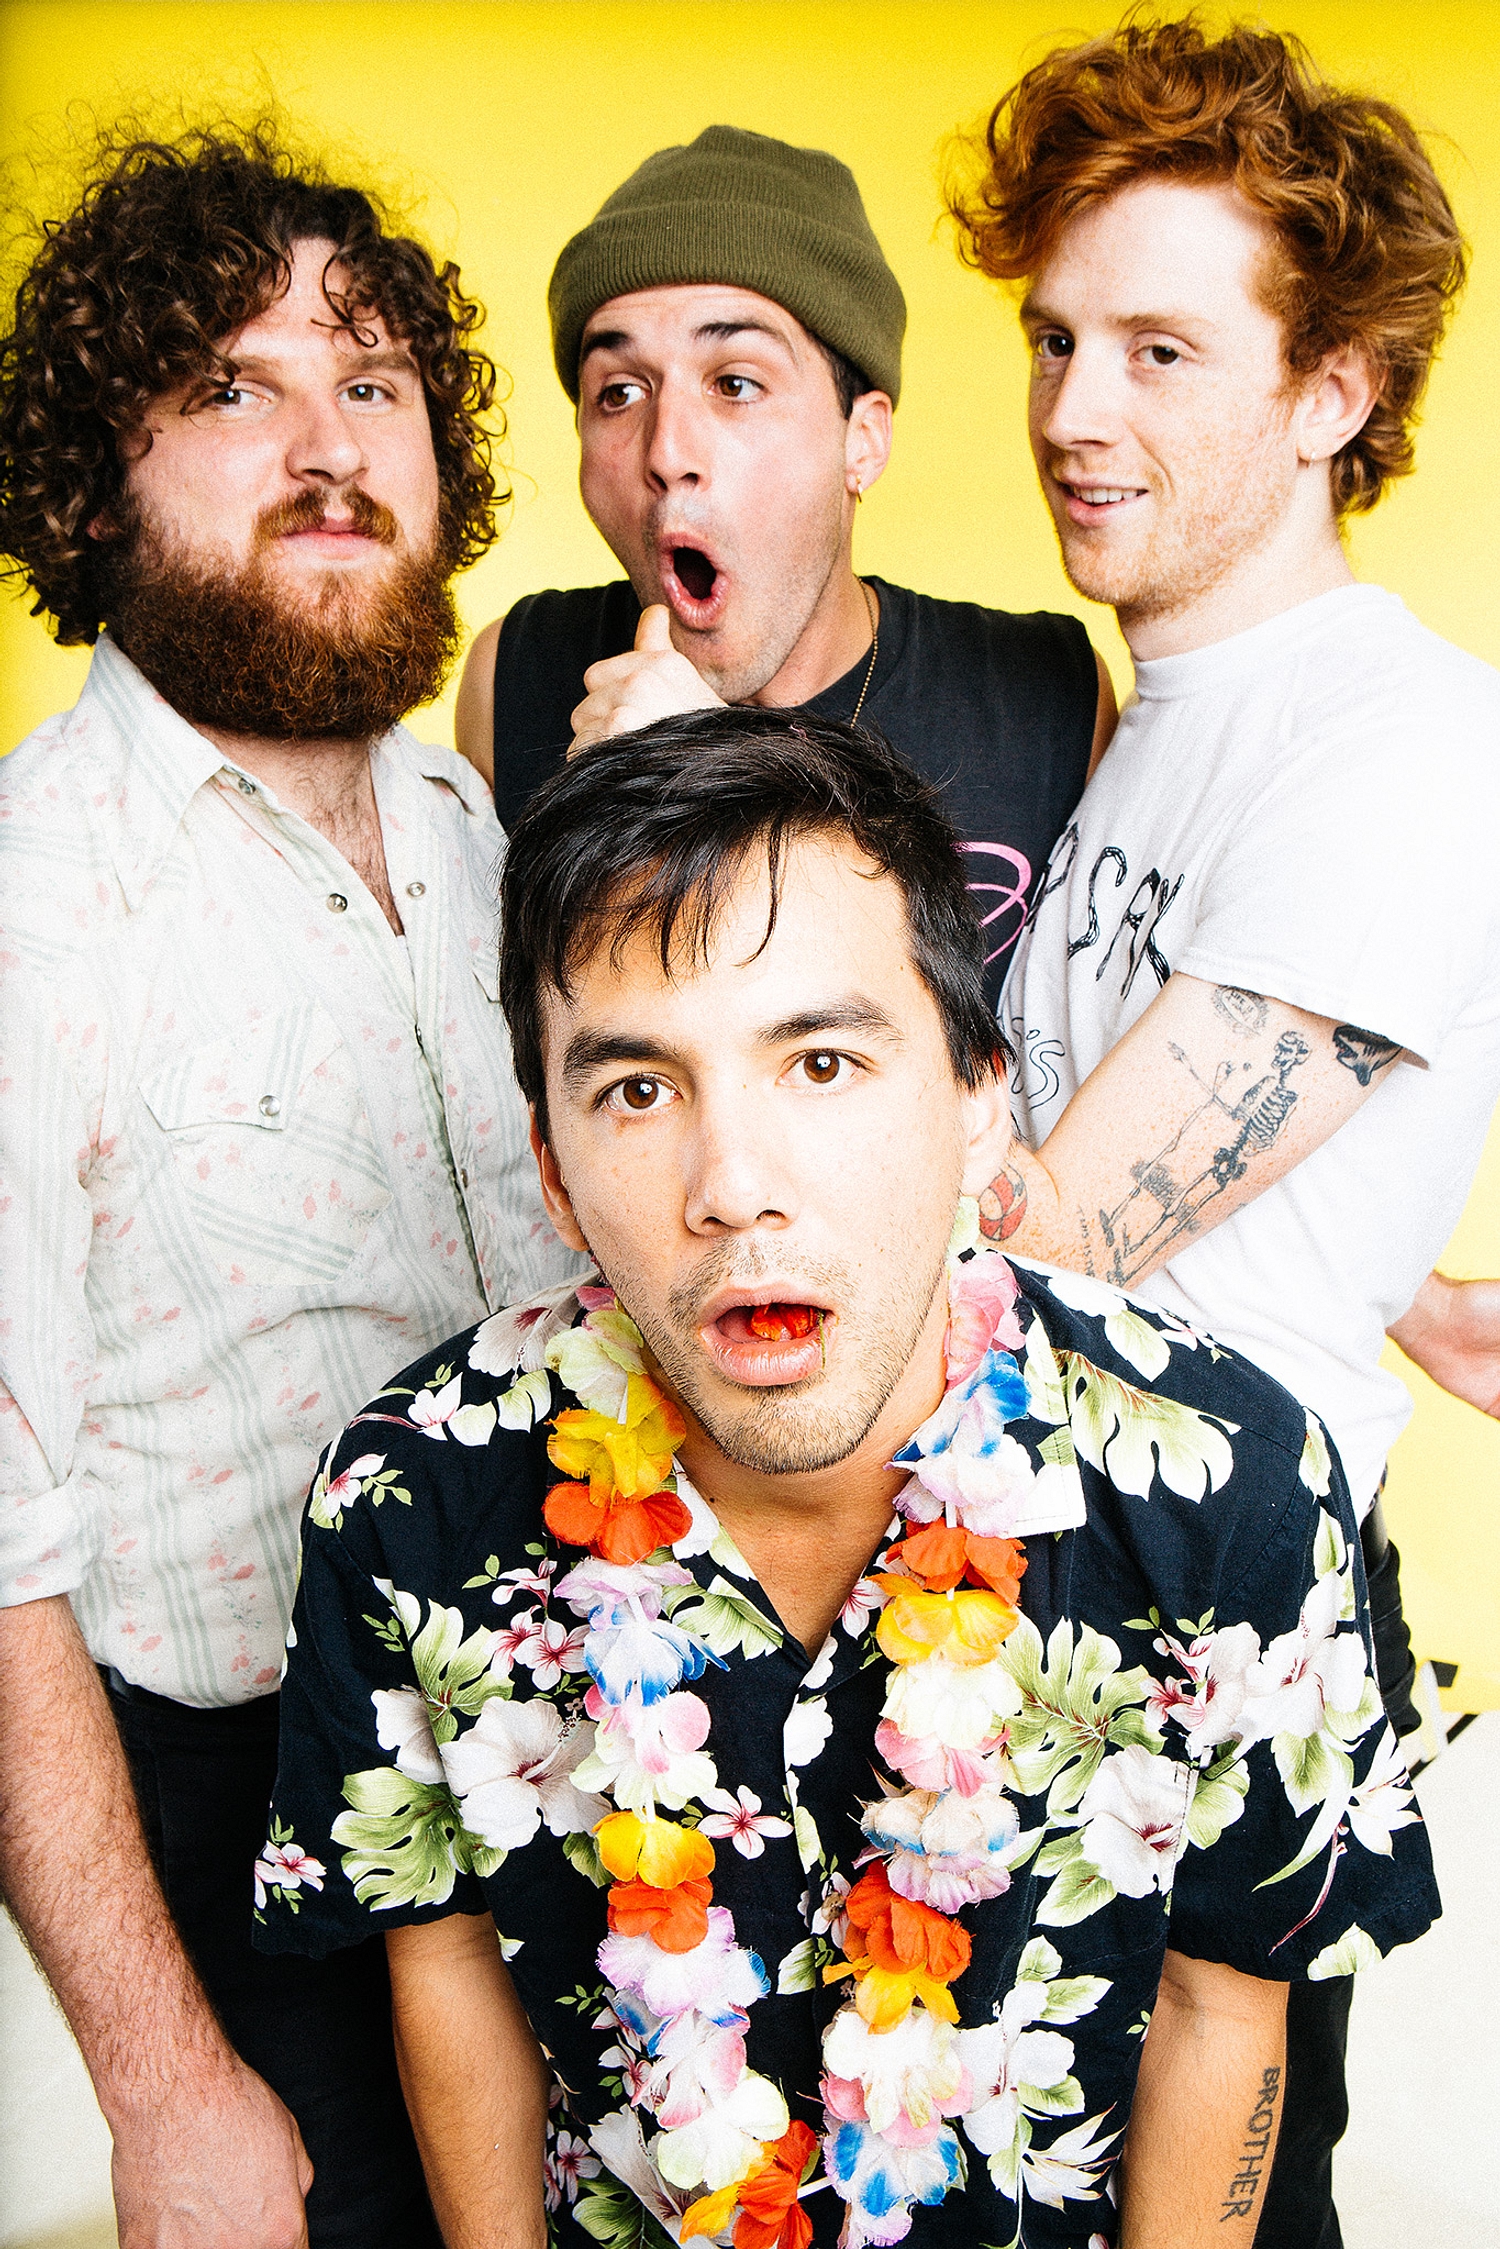 FIDLAR: "Just do whatever you want. If you wanna try it, fucking try it"